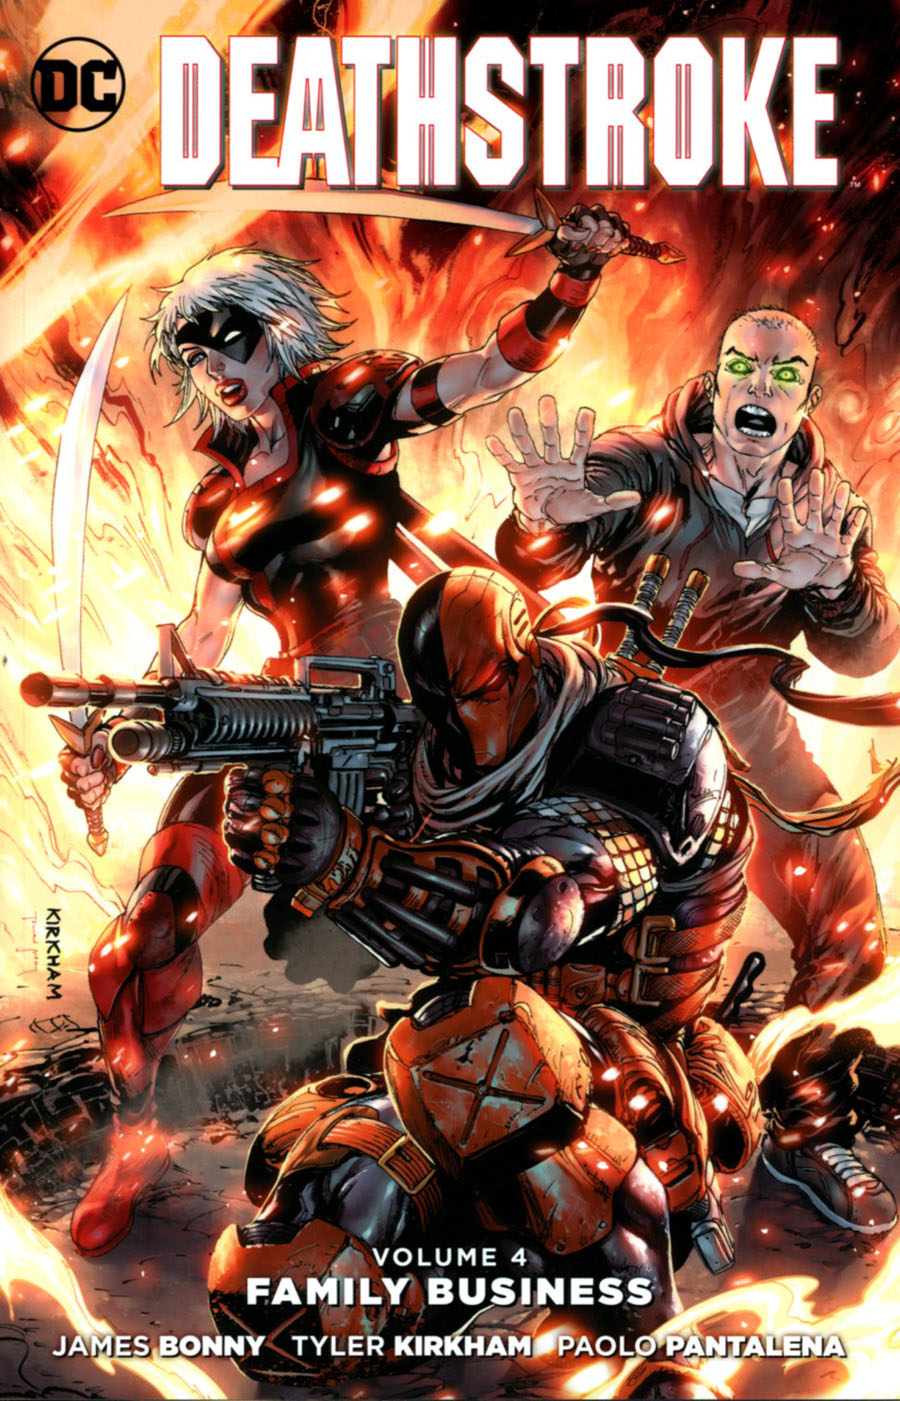 Deathstroke (New 52) Vol 4 Family Business TP